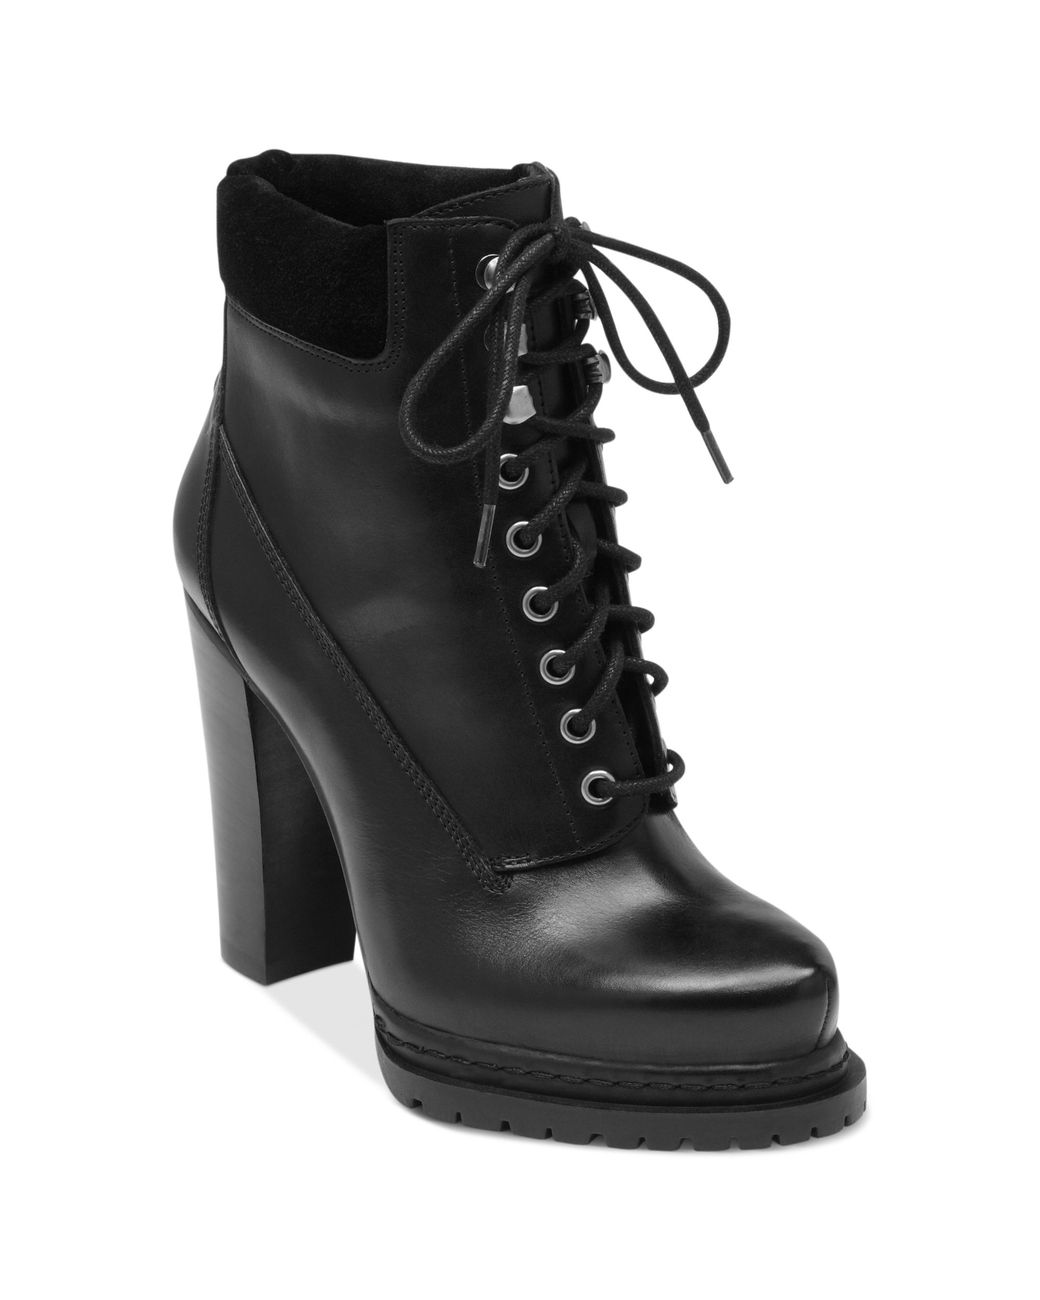 How To Wear Combat Boots in the Fall - Dawn P. Darnell